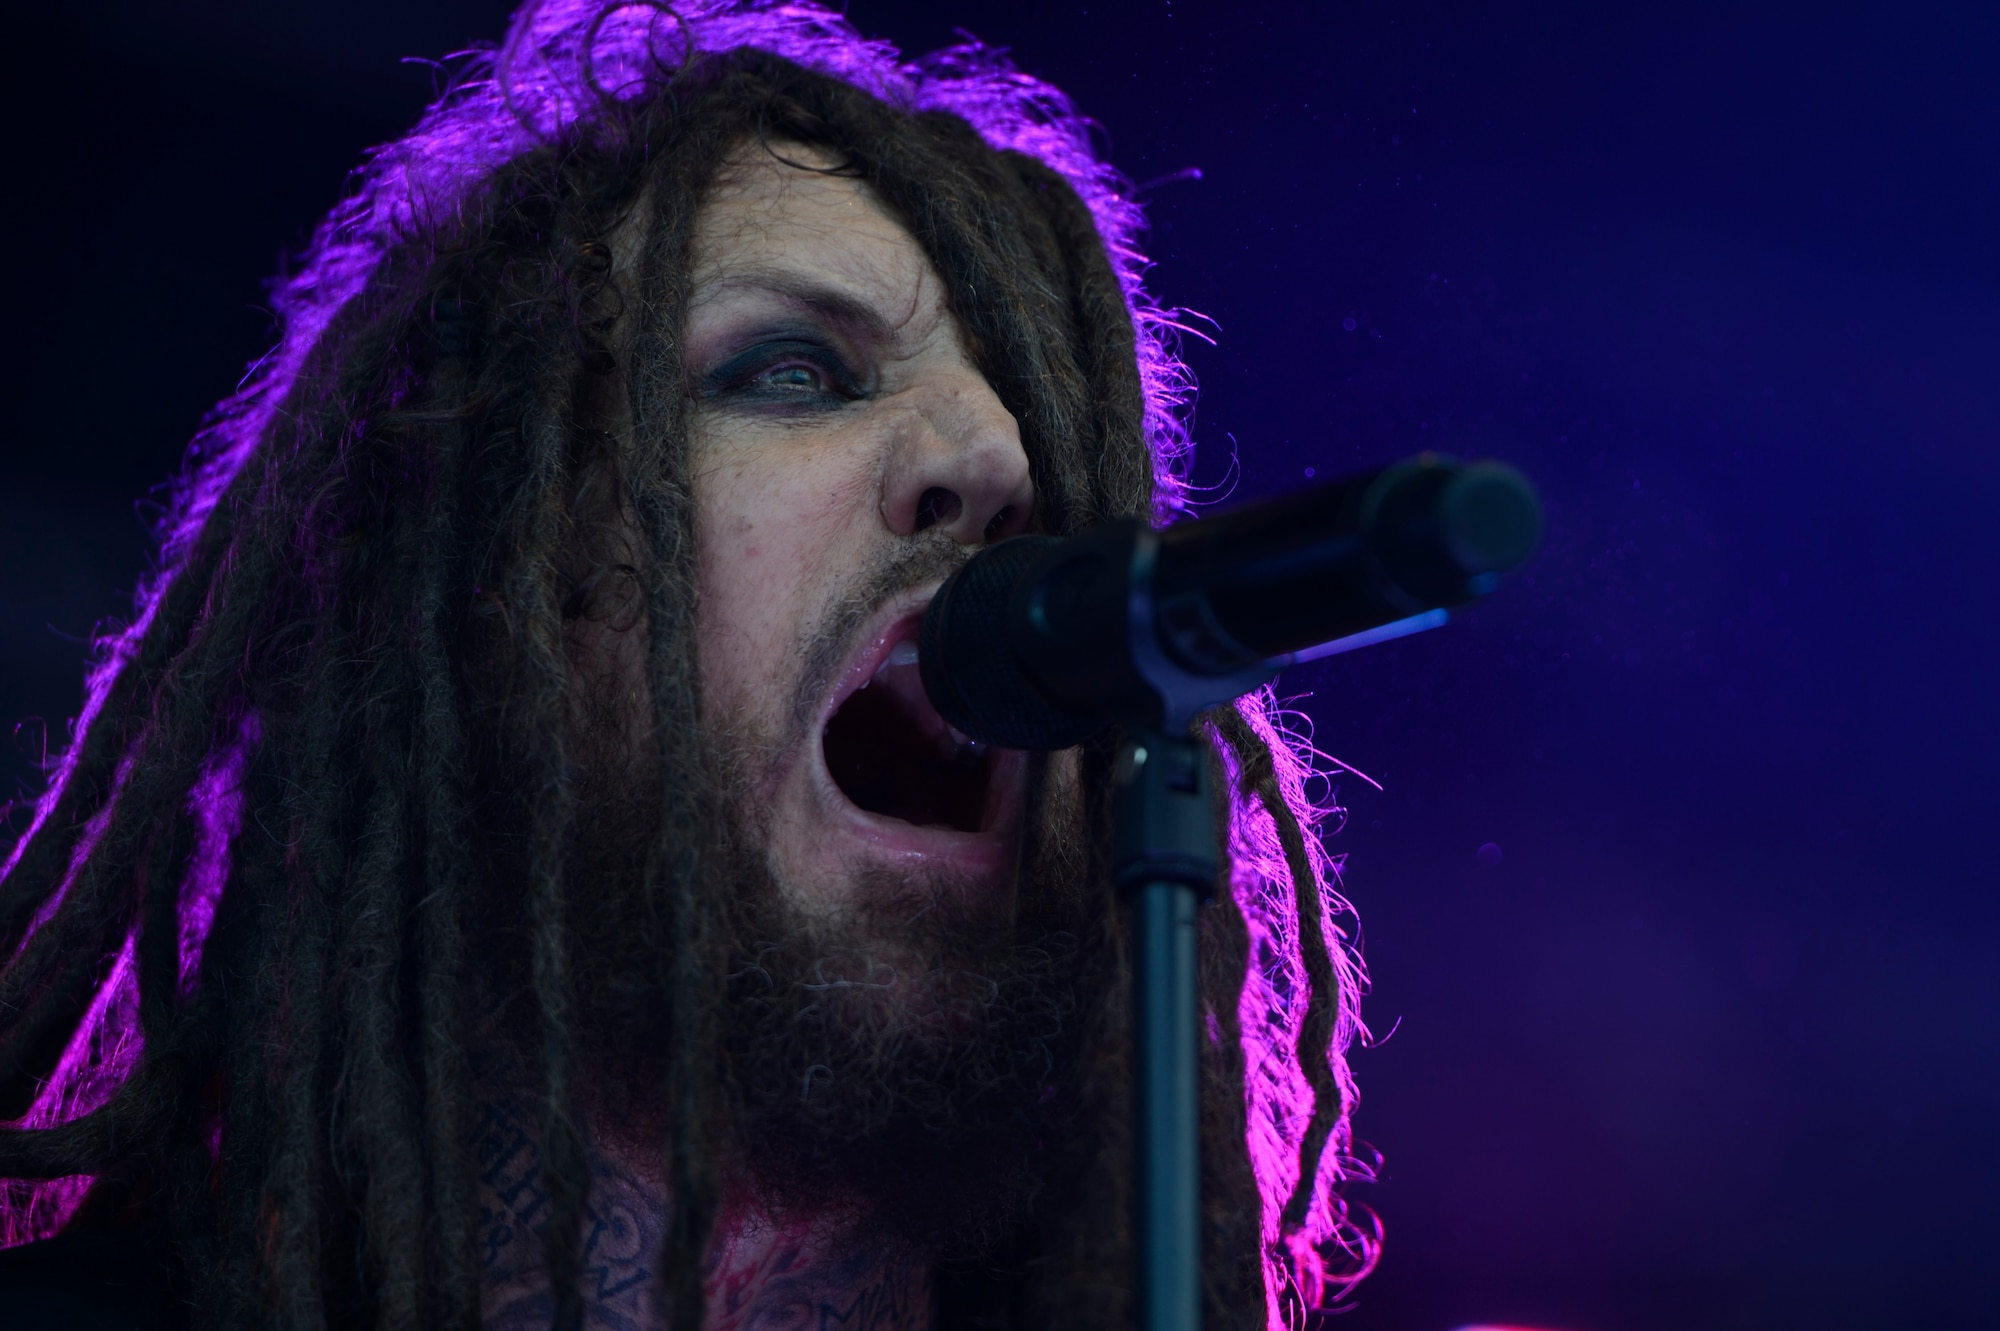 SPANGDAHLEM AIR BASE, Germany – Brian Welch, lead singer for Love and Death, screams into the mic during a performance July 3, 2013. The 52nd Force Support squadron hosted the Super Saber Appreciation Day concert a day before the July 4 festivities. Welch is an original member of Korn and still plays with them; he started his own band, Love and Death. (U.S. Air Force photo by Staff Sgt. Christopher Ruano)